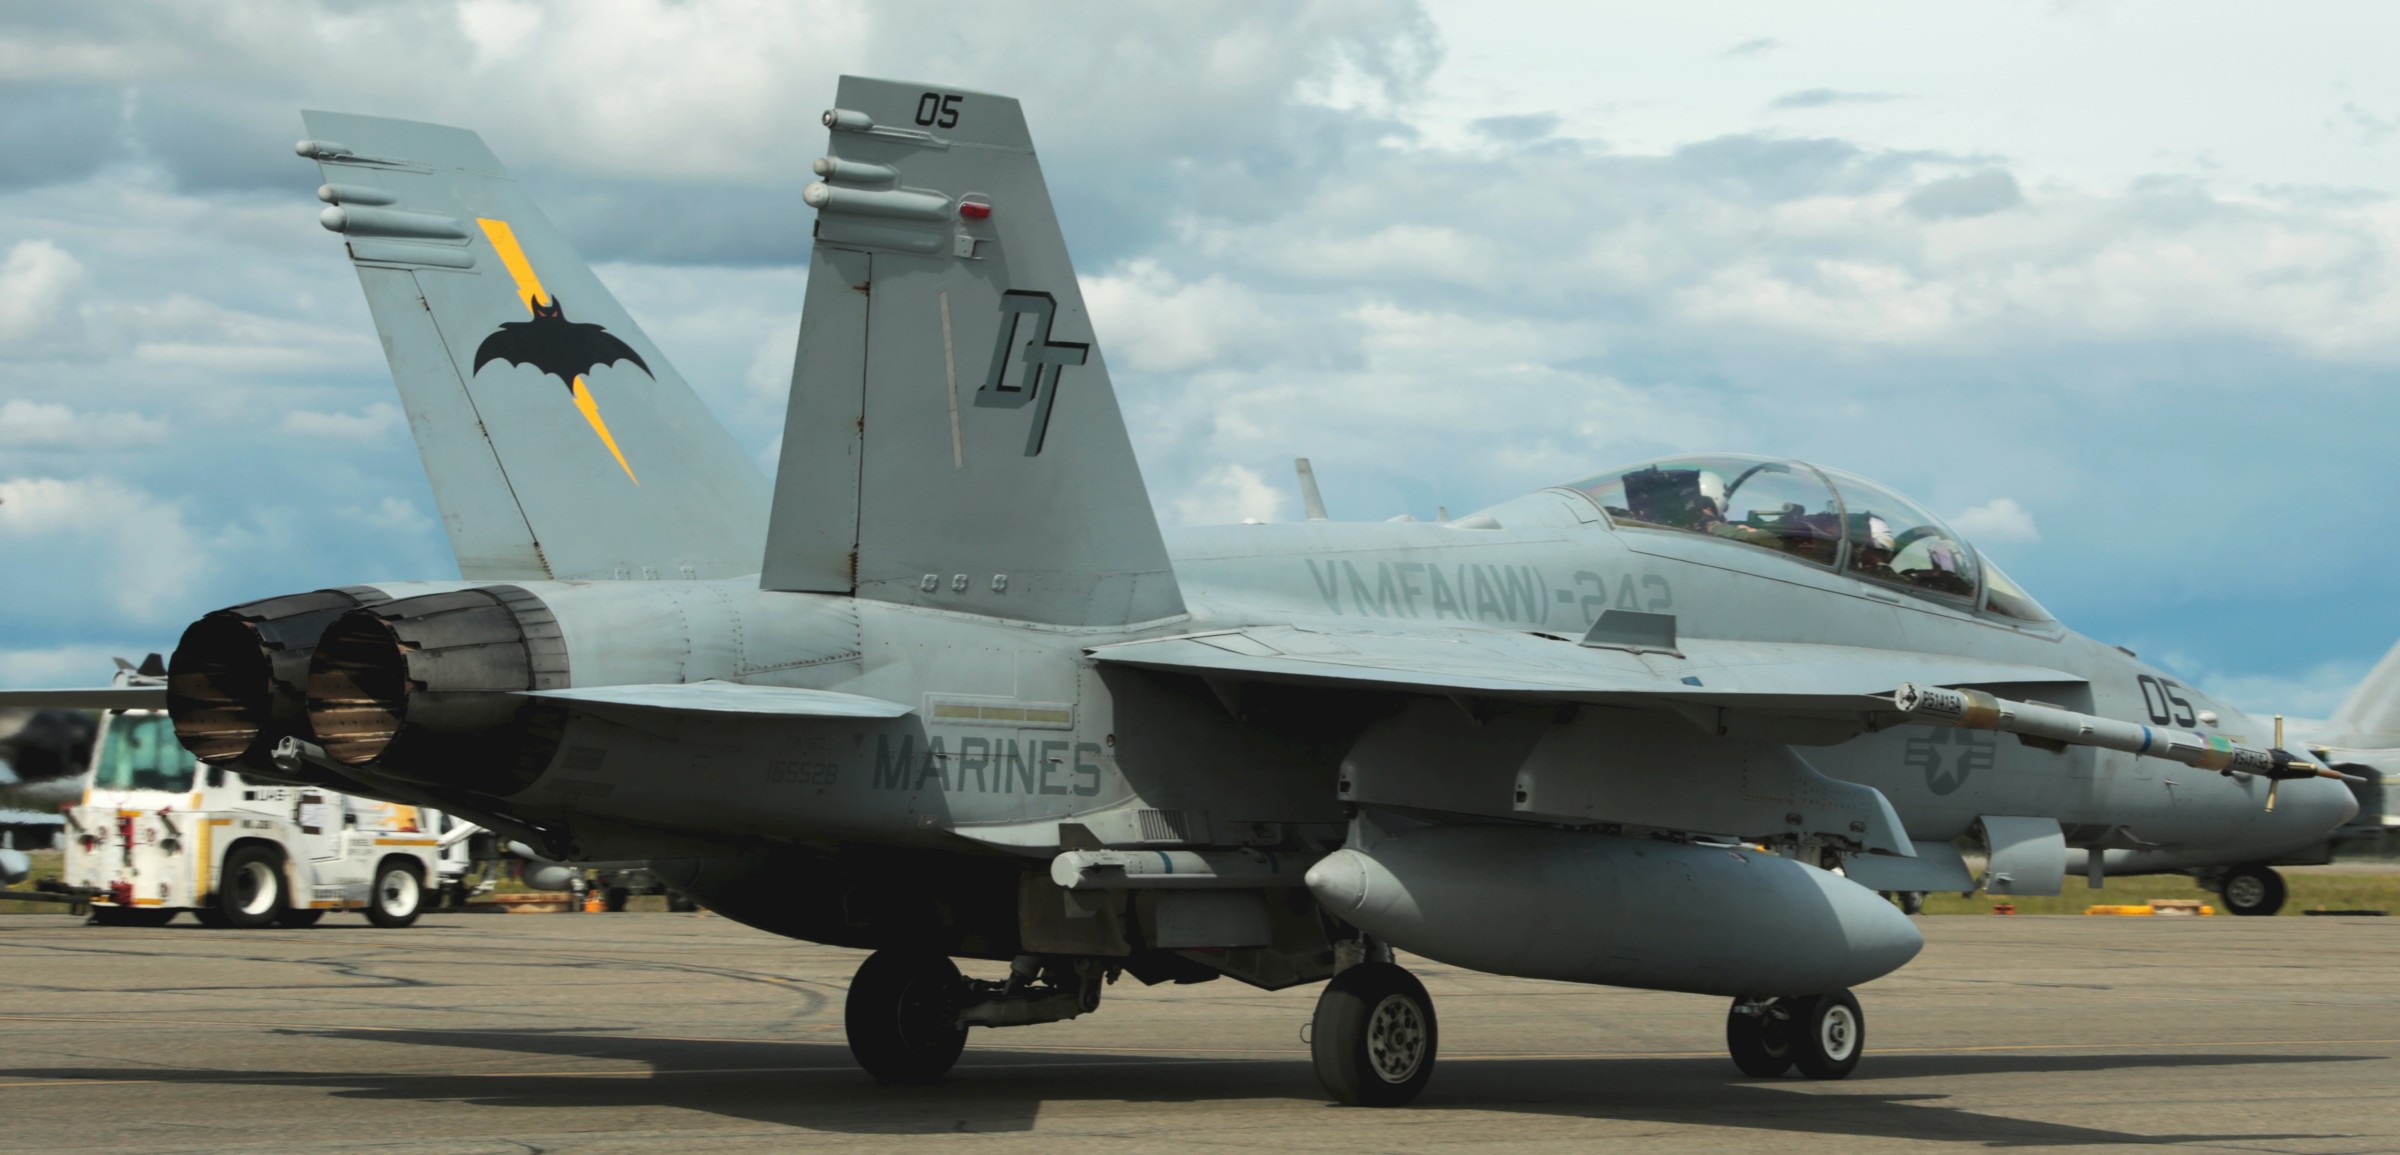 vmfa(aw)-242 bats marine all-weather fighter attack squadron usmc f/a-18d hornet 59 red flag alaska eielson afb